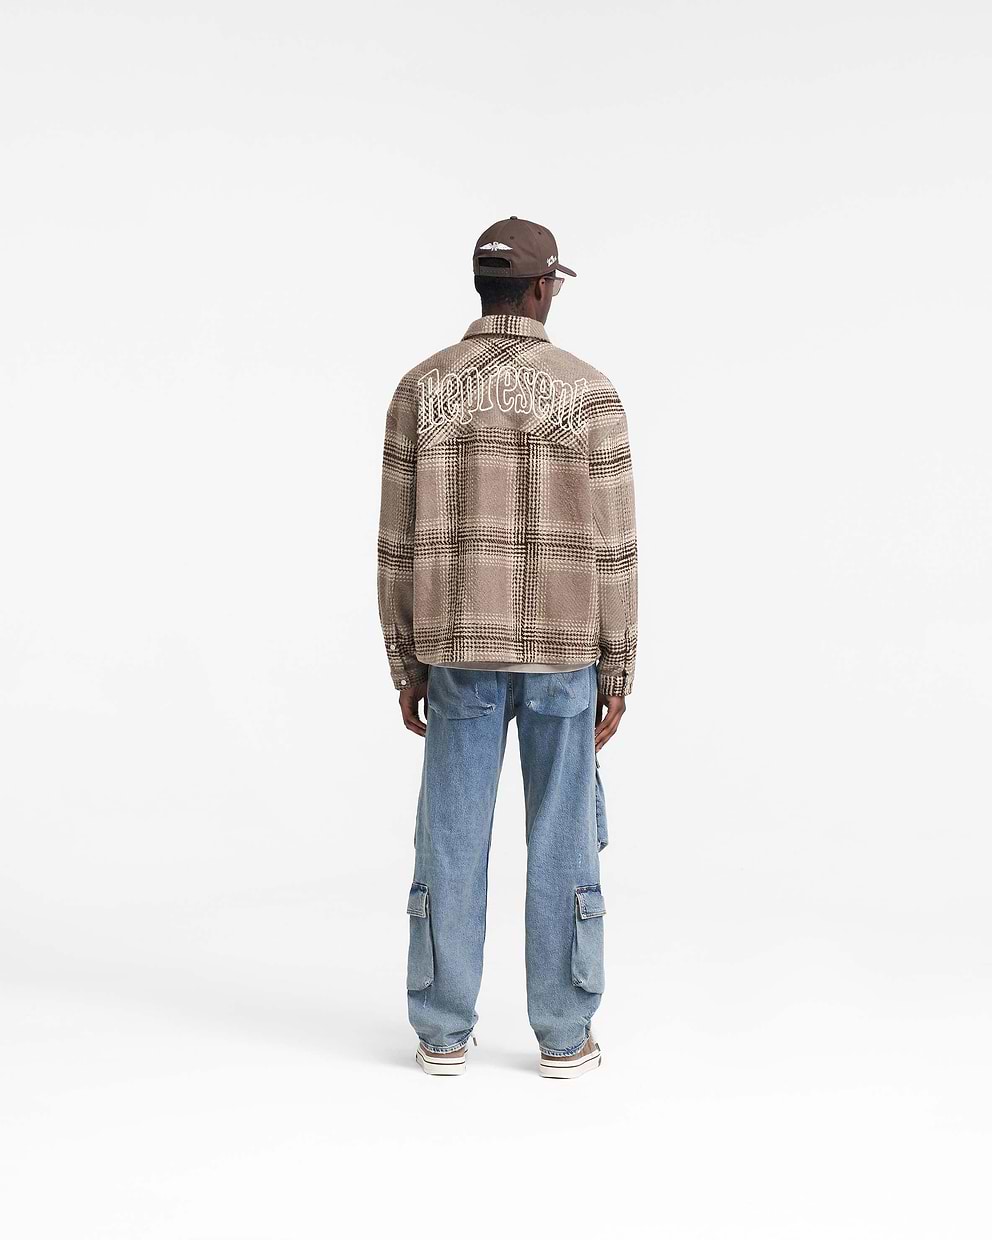 Represent Flannel Shirt - Brown Check